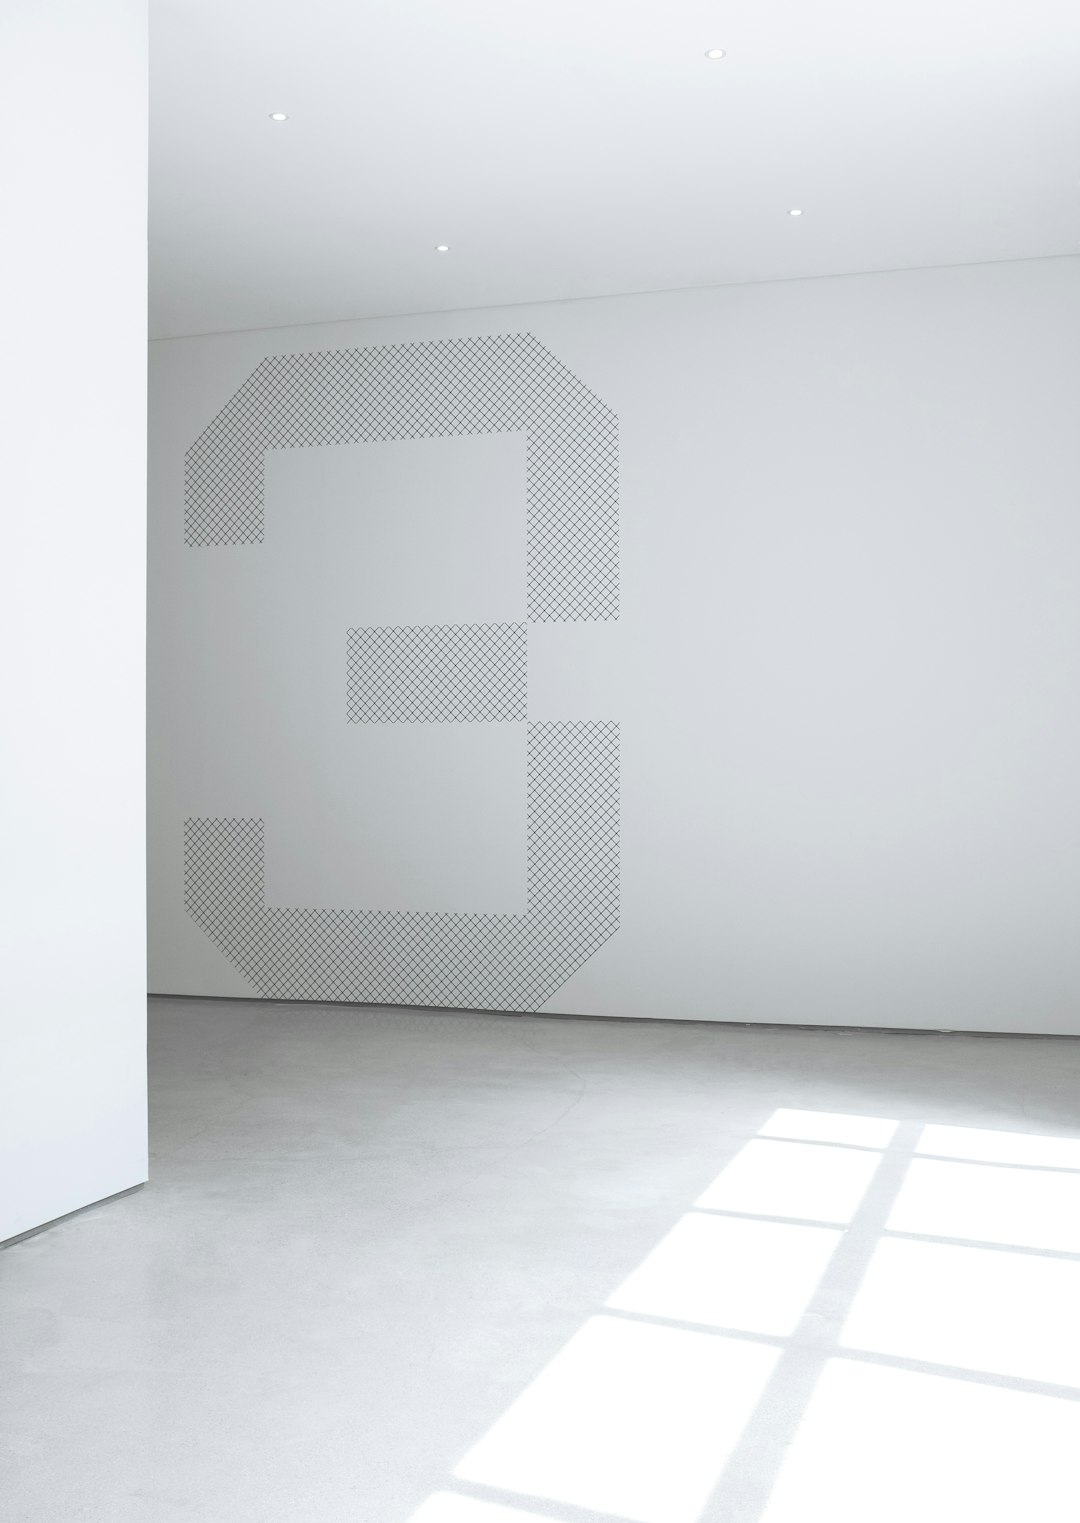  photo of white concrete wall inside room wall